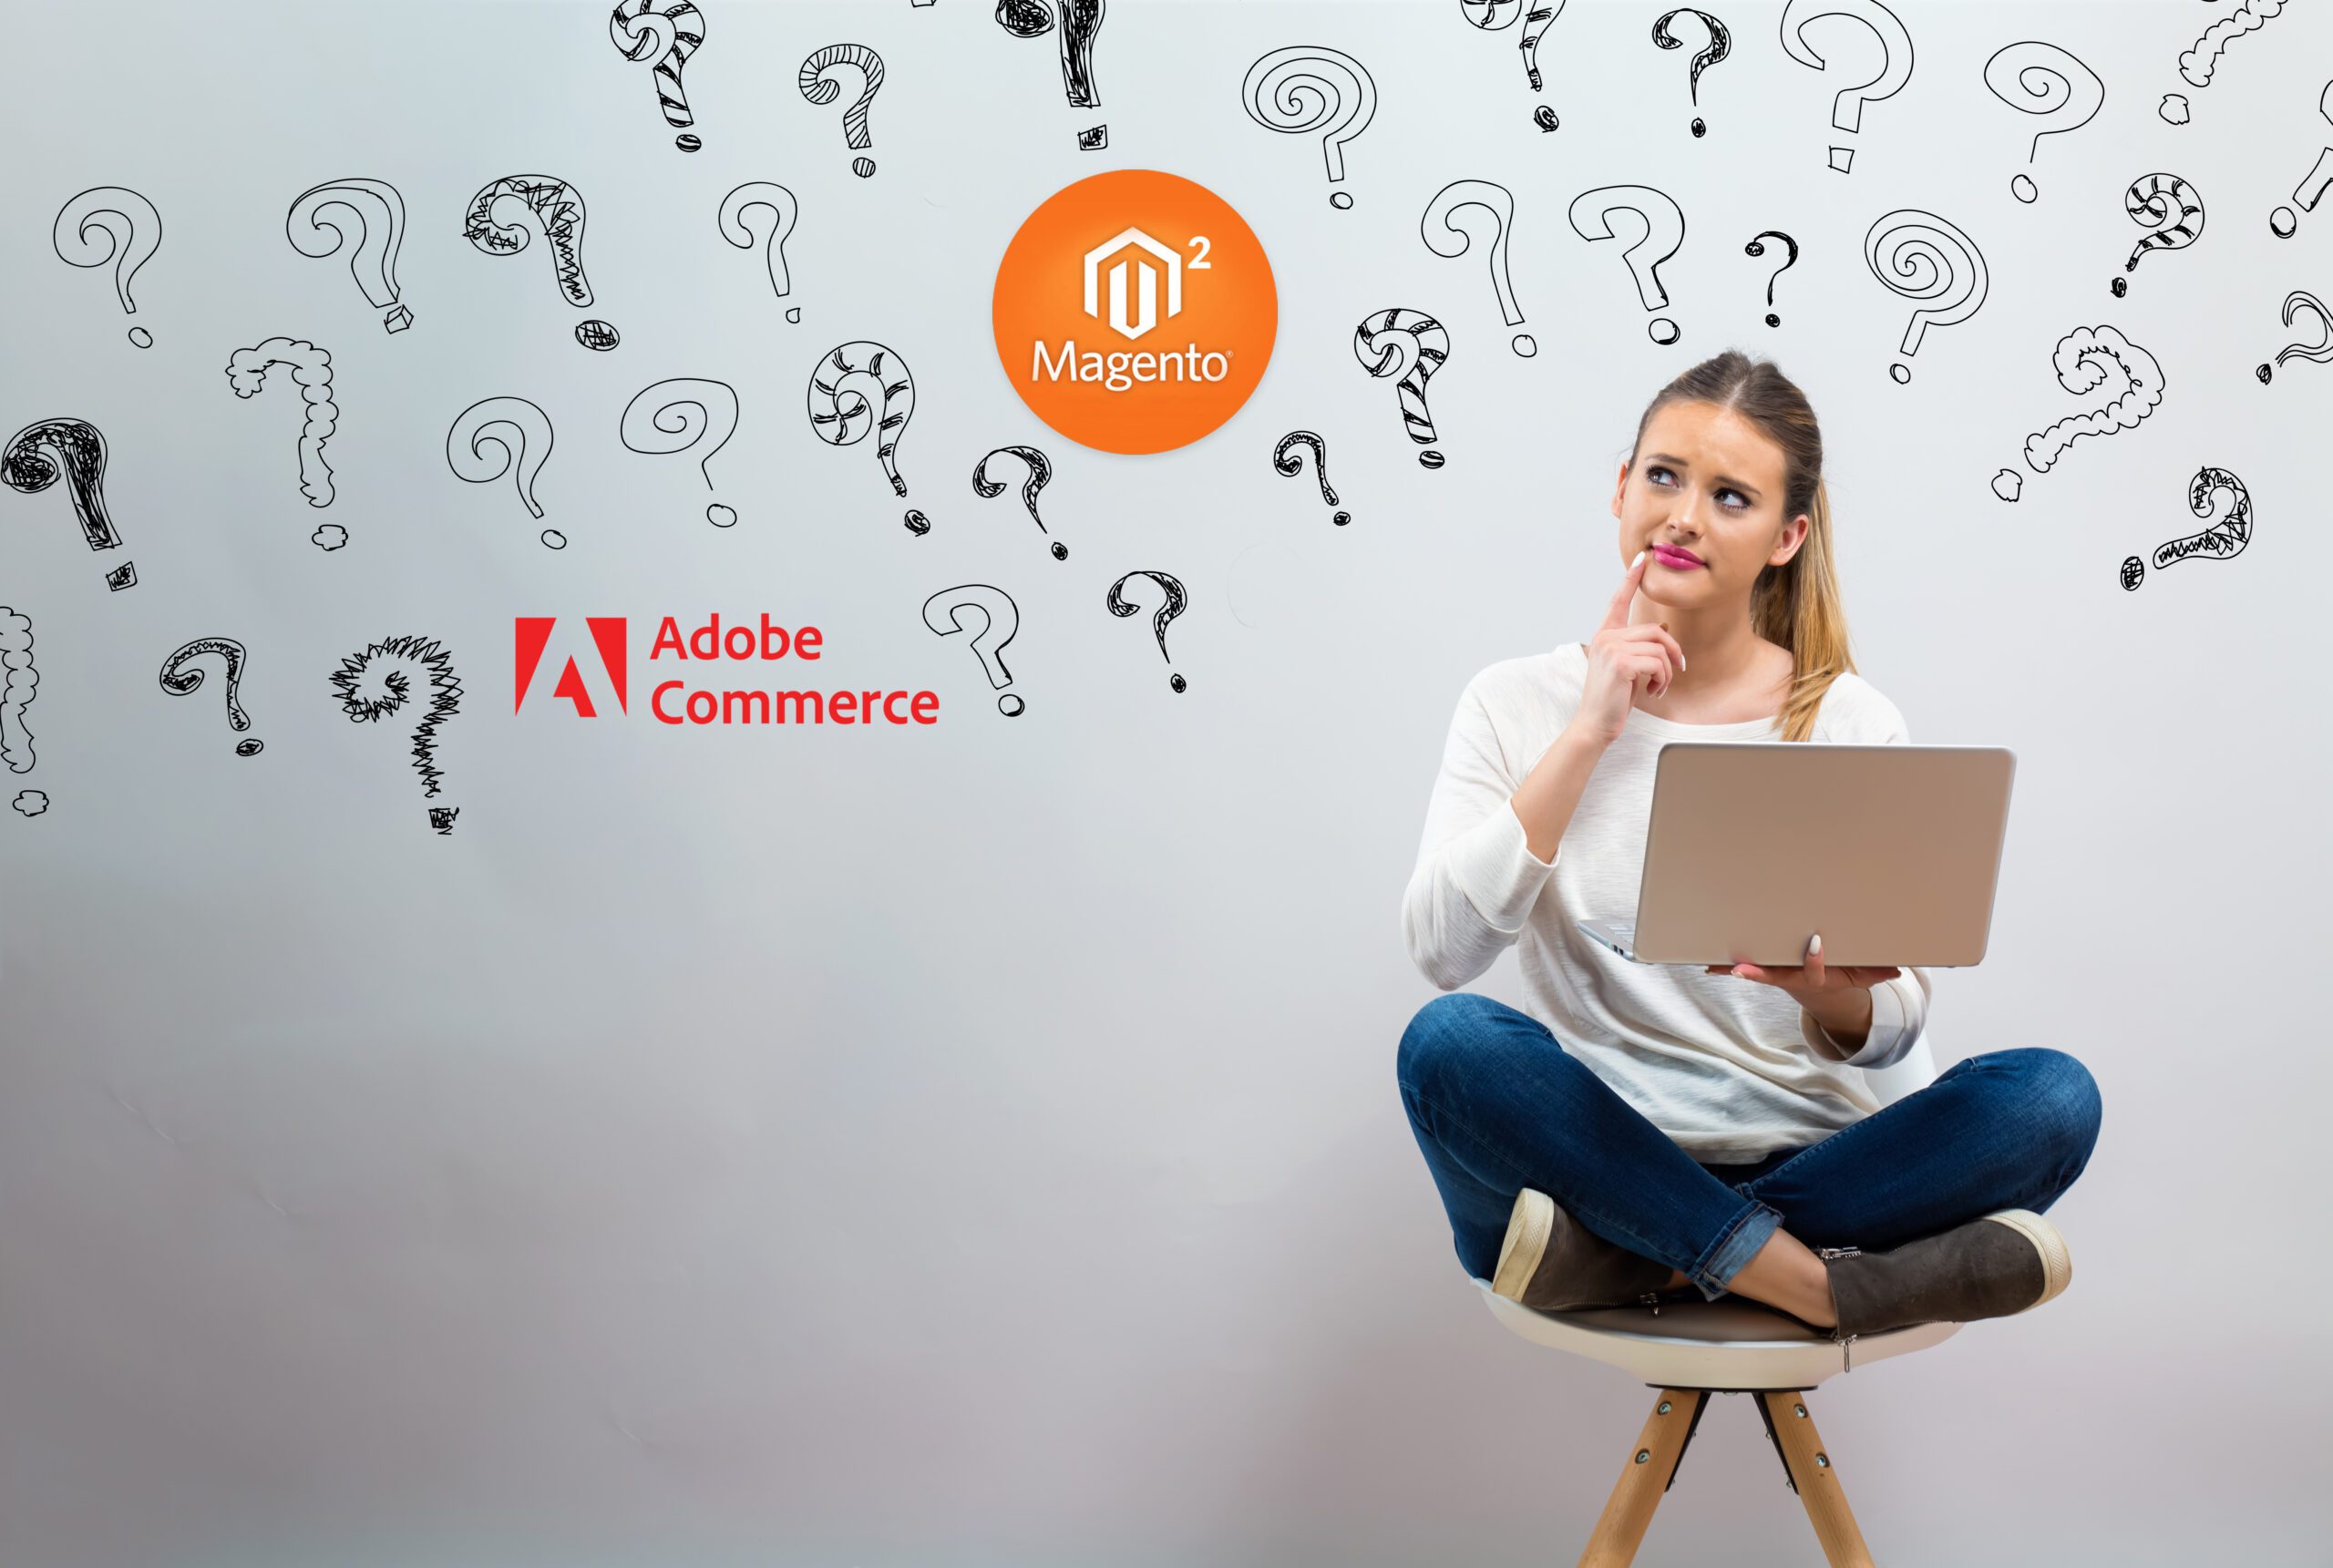 Is Magento 2 the same as Adobe Commerce?